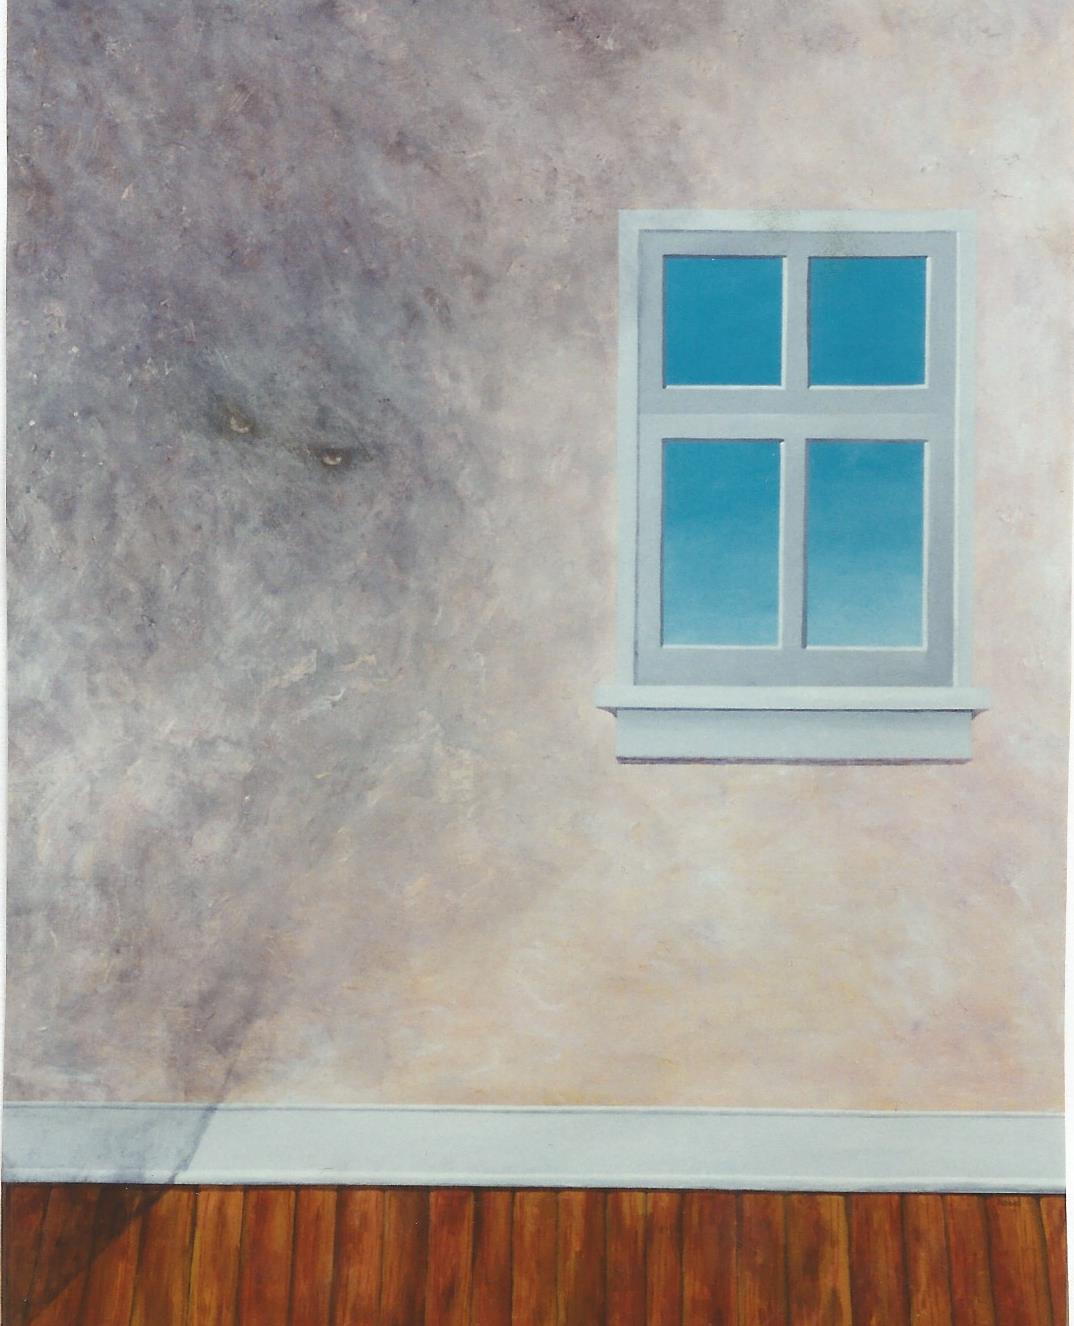 A painting of a pinkish beige wall with a white frame window. Outside is bright blue sky. There is a strip of hardwood floor along the bottom edge of the painting. A ghostly cloud with eyes subtly penciled in creeps in on the left side.